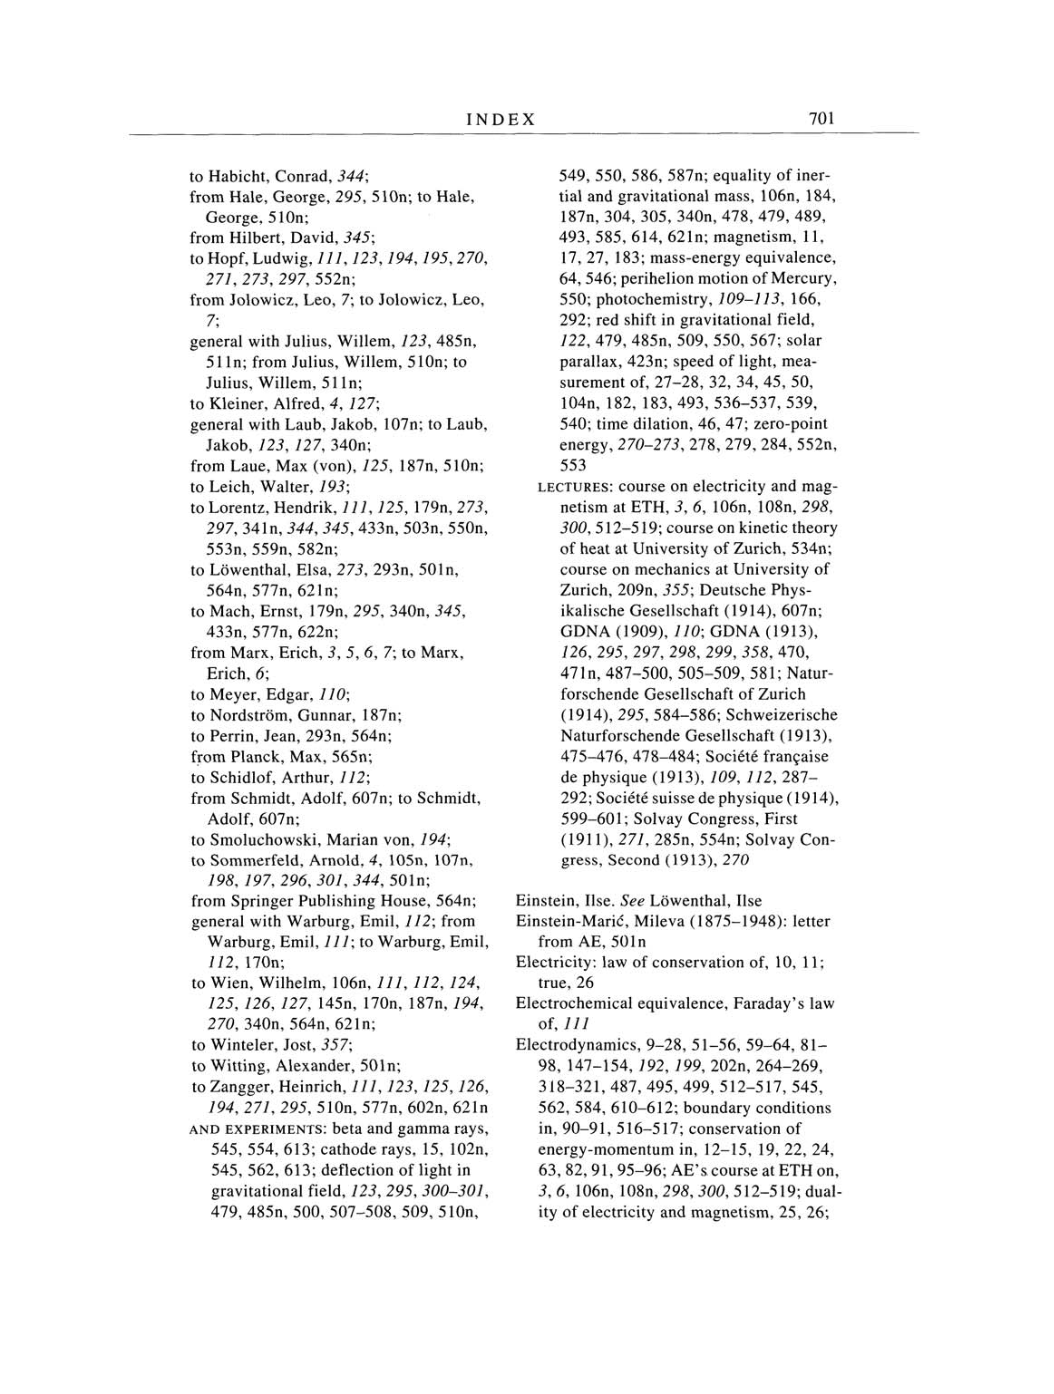 Volume 4: The Swiss Years: Writings 1912-1914 page 701